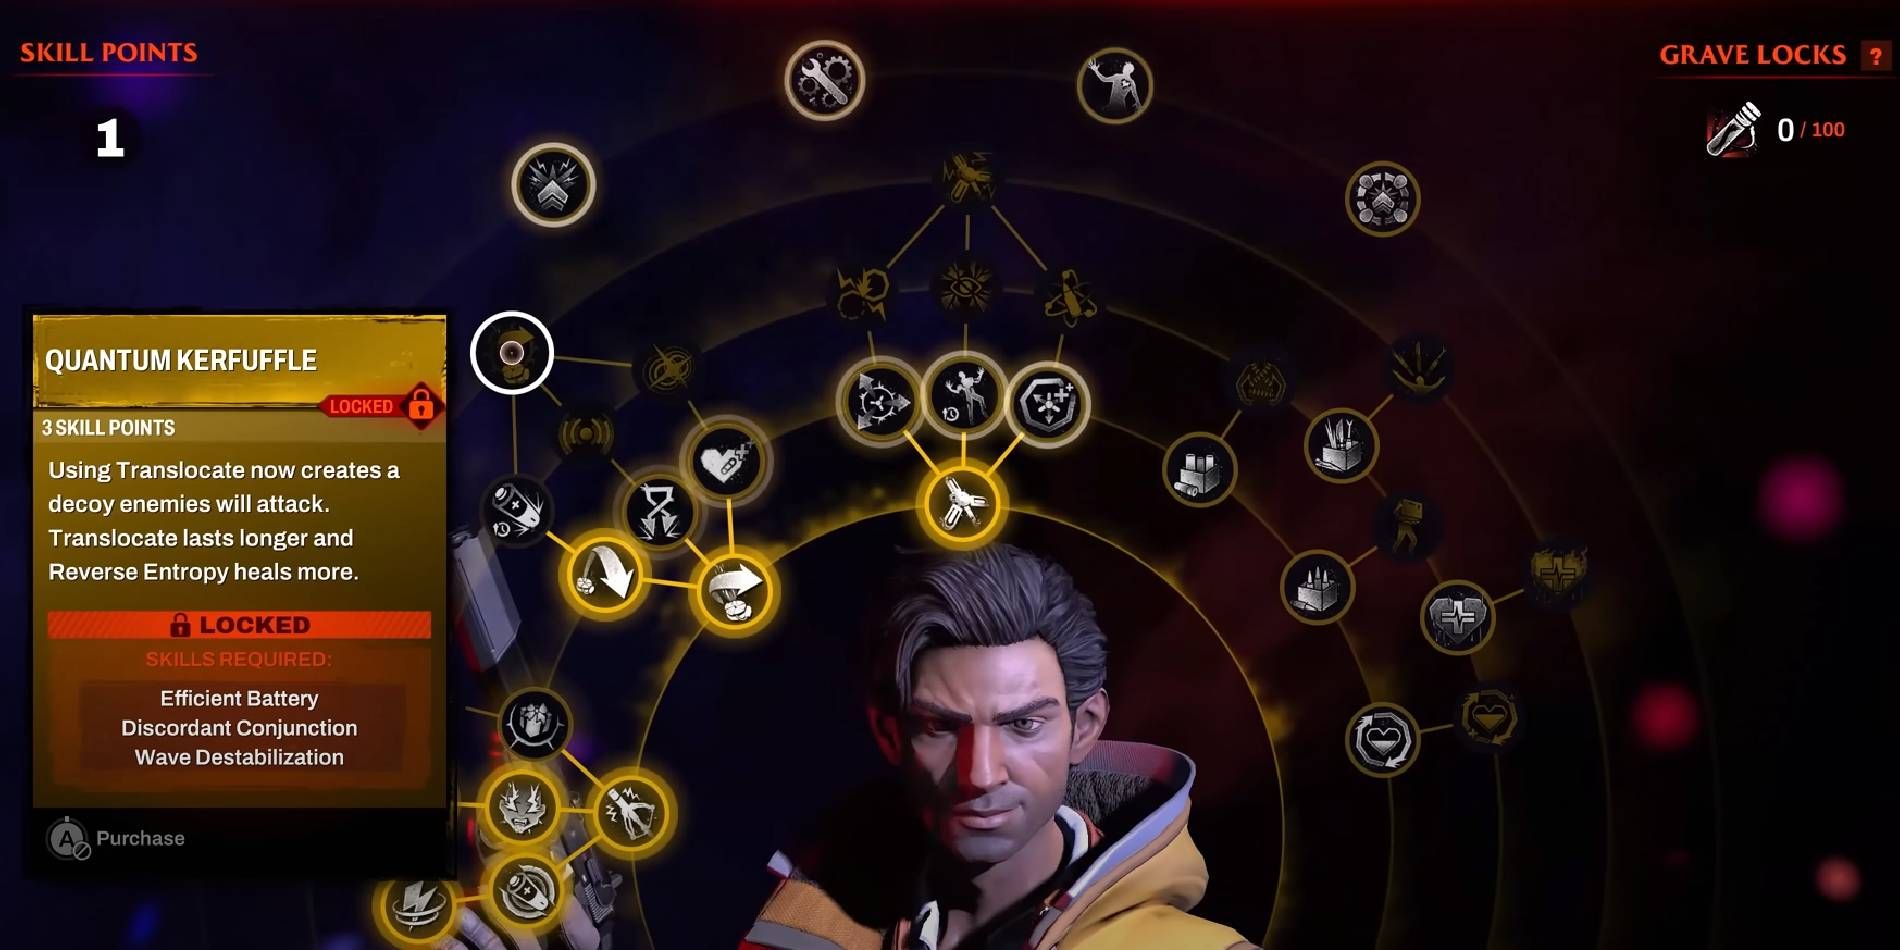 Redfall Character Skill Tree with Quantum Kerfuffle Skill Selected and Skill Points Available Displayed